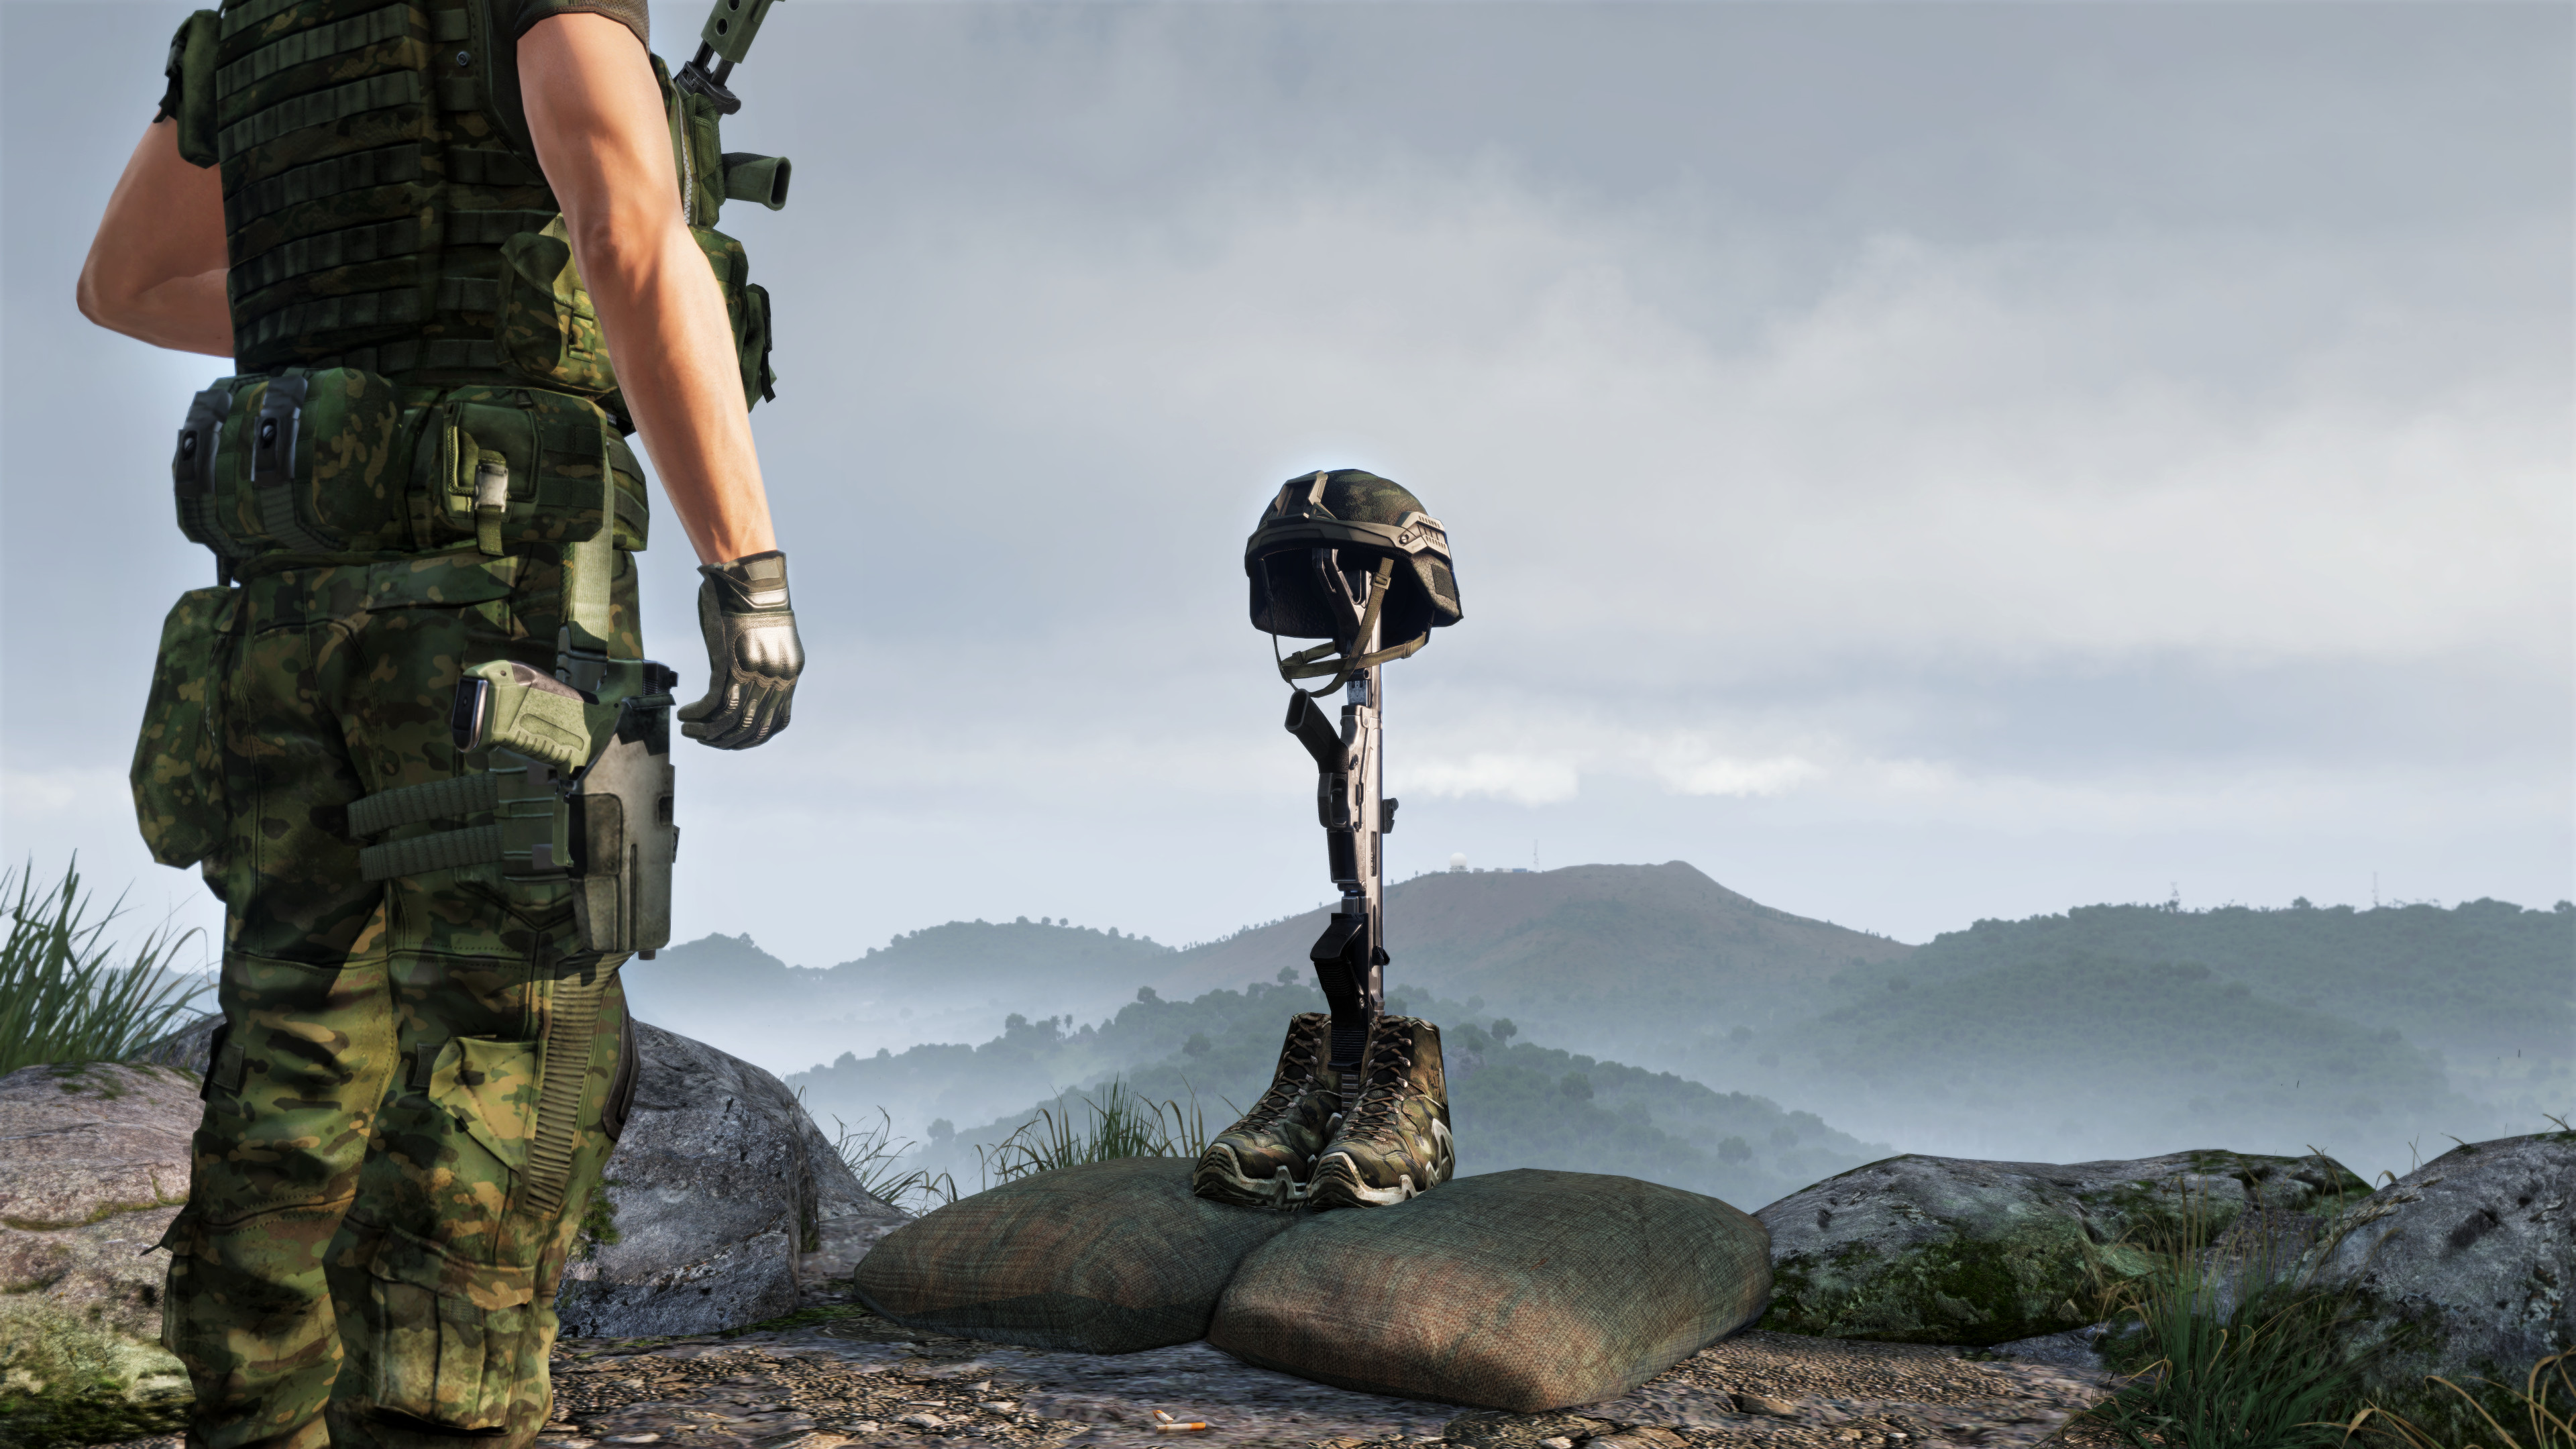 Arma 3's Bootcamp update looks to ease new players into the game - Polygon